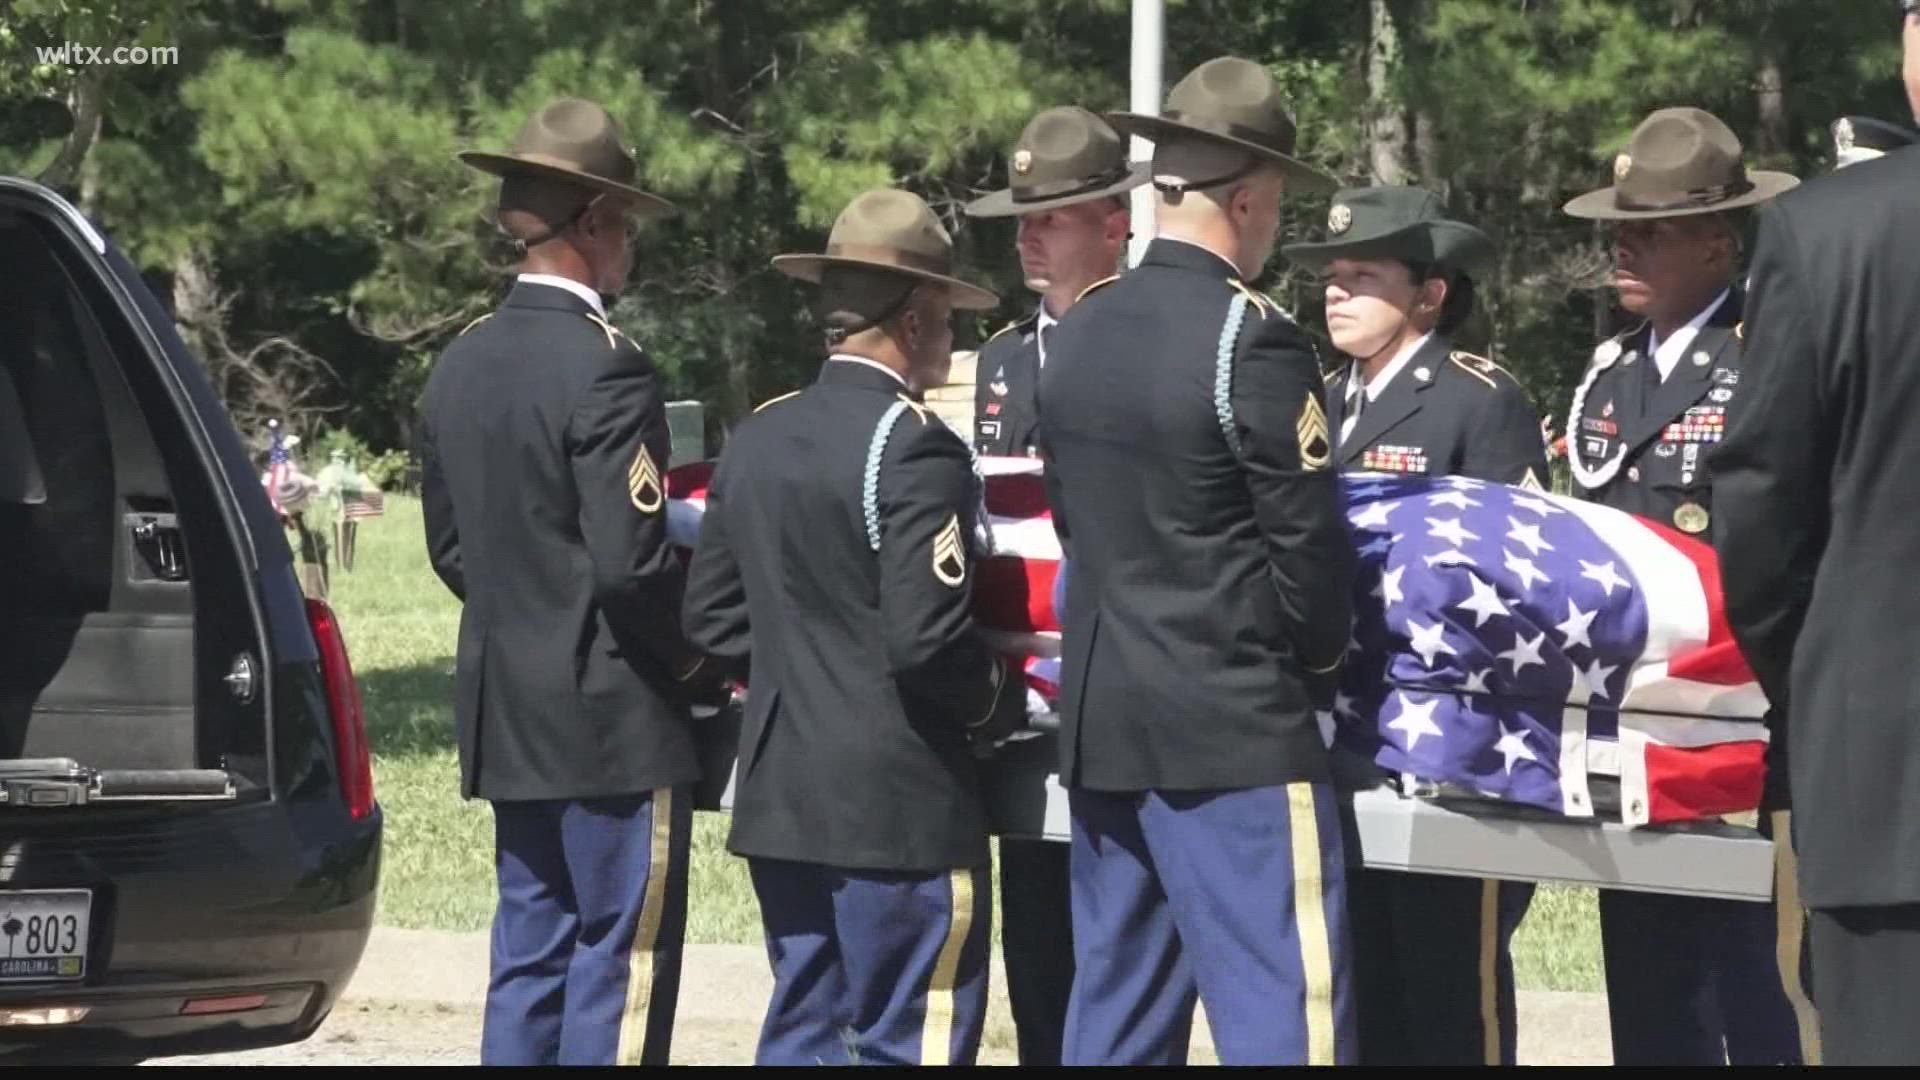 On what would have been his 89th birthday PFC Crosby was laid to rest with full military honors at Crestlawn Memorial Gardens in Sumter.